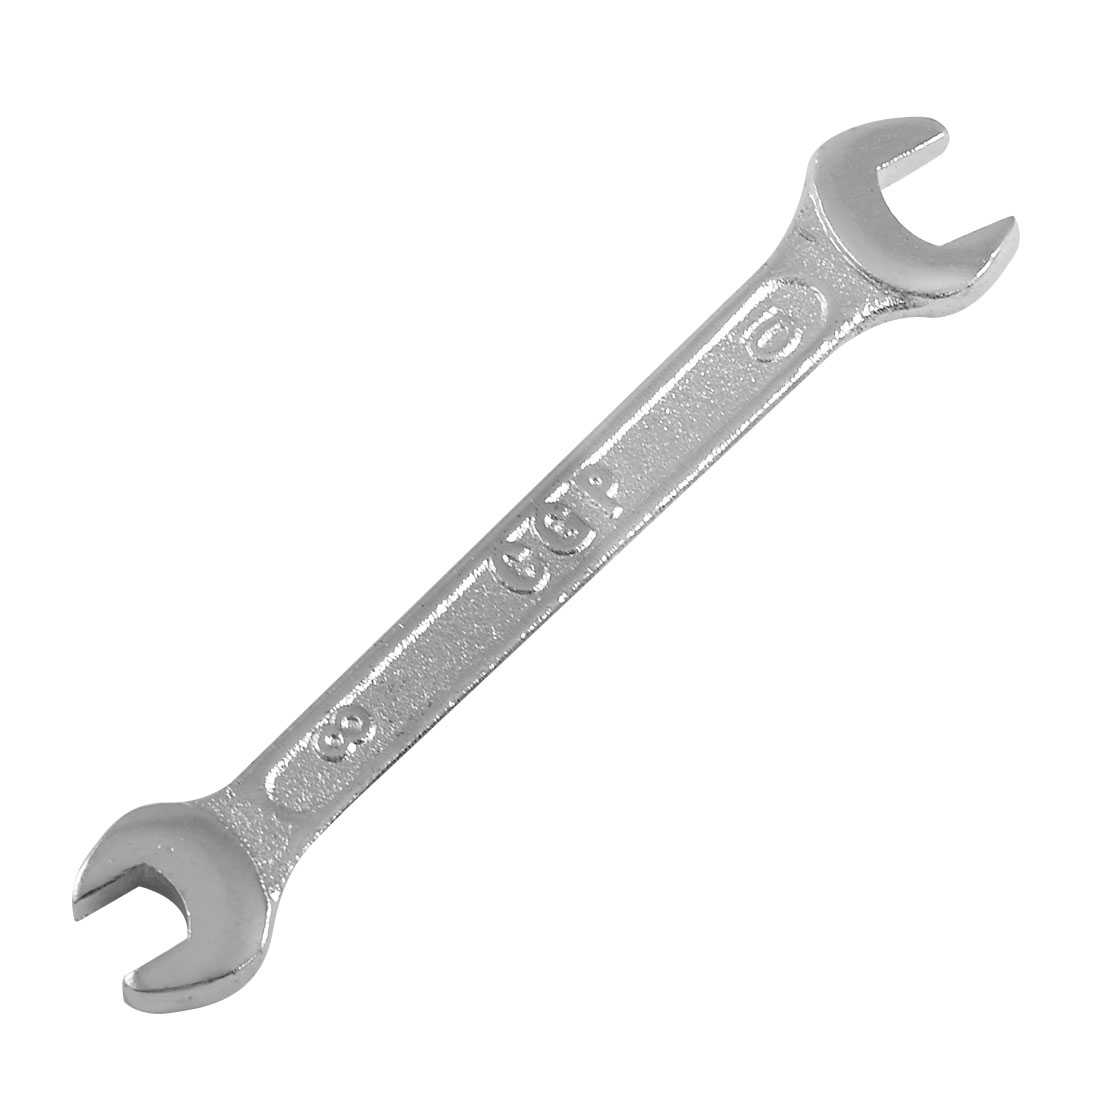 Unique Bargains Maintenance Tools Tightening Loosening Bolts Open End Wrench 8mm x 10mm